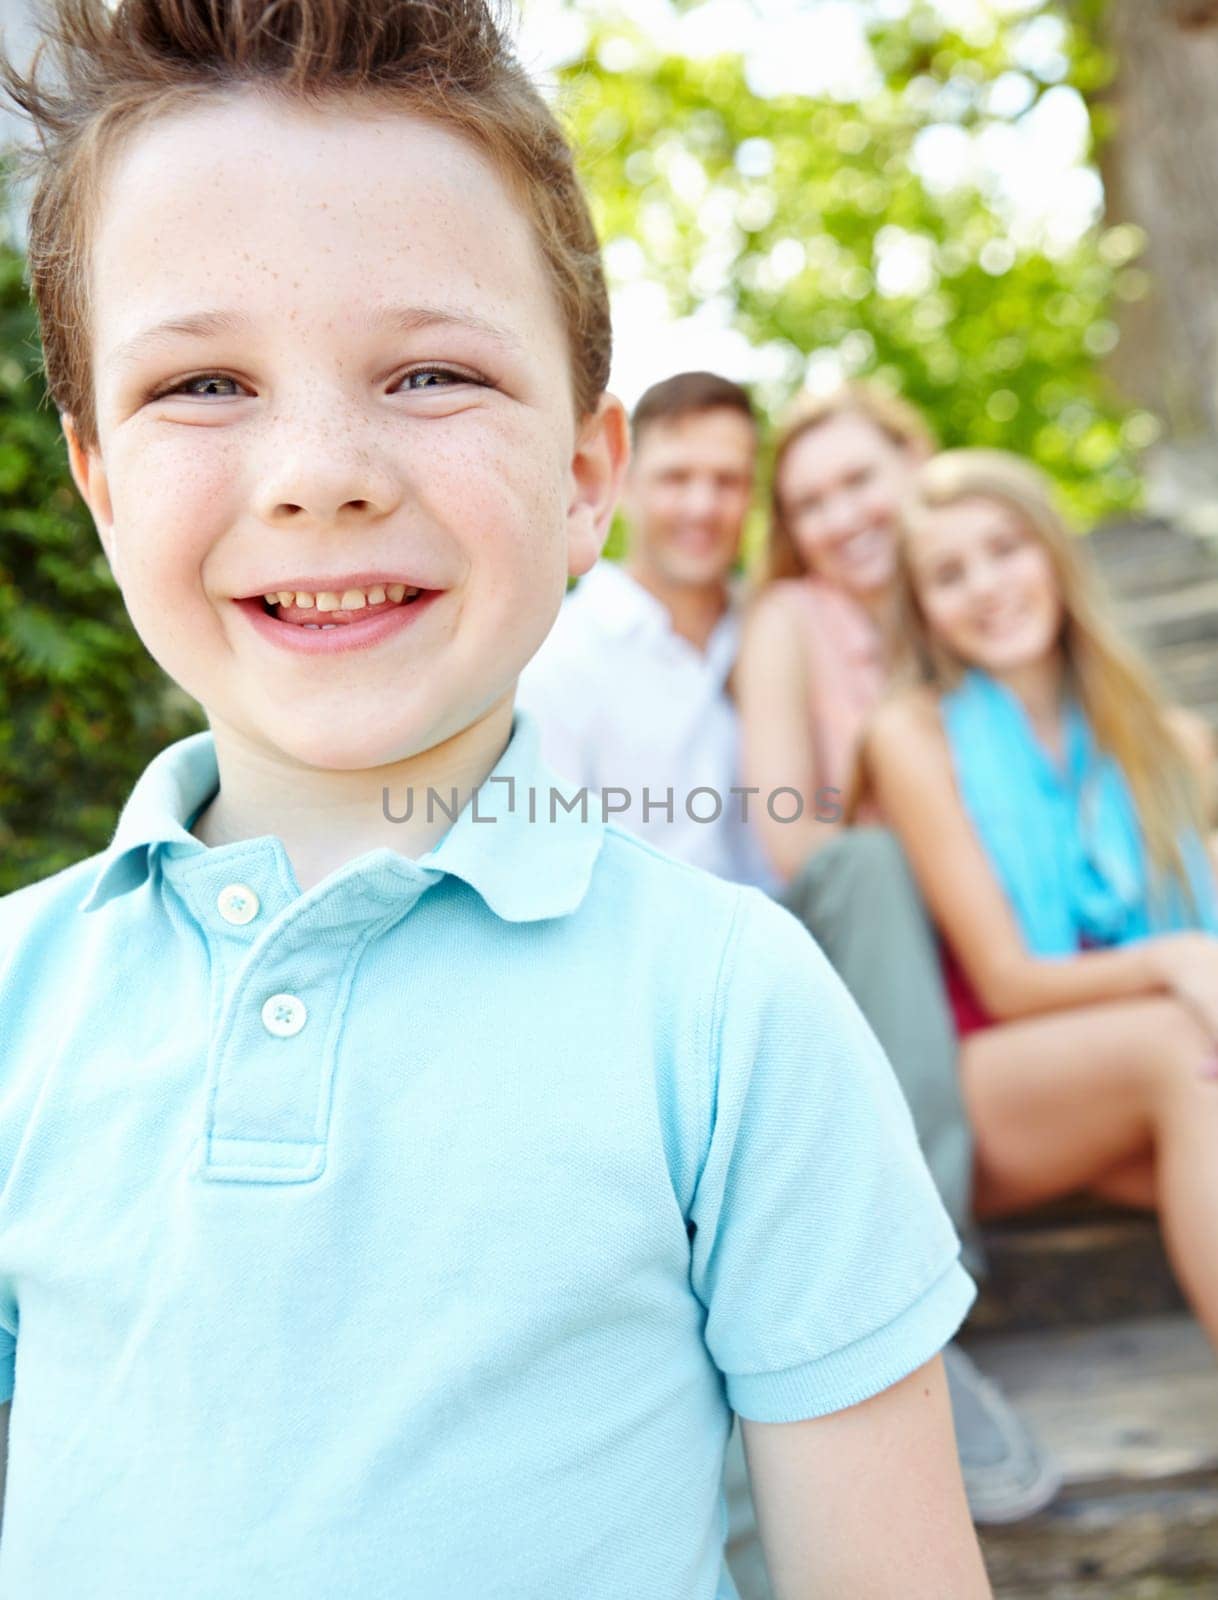 This is my family. Cute little boy with family sitting behind him while outdoors